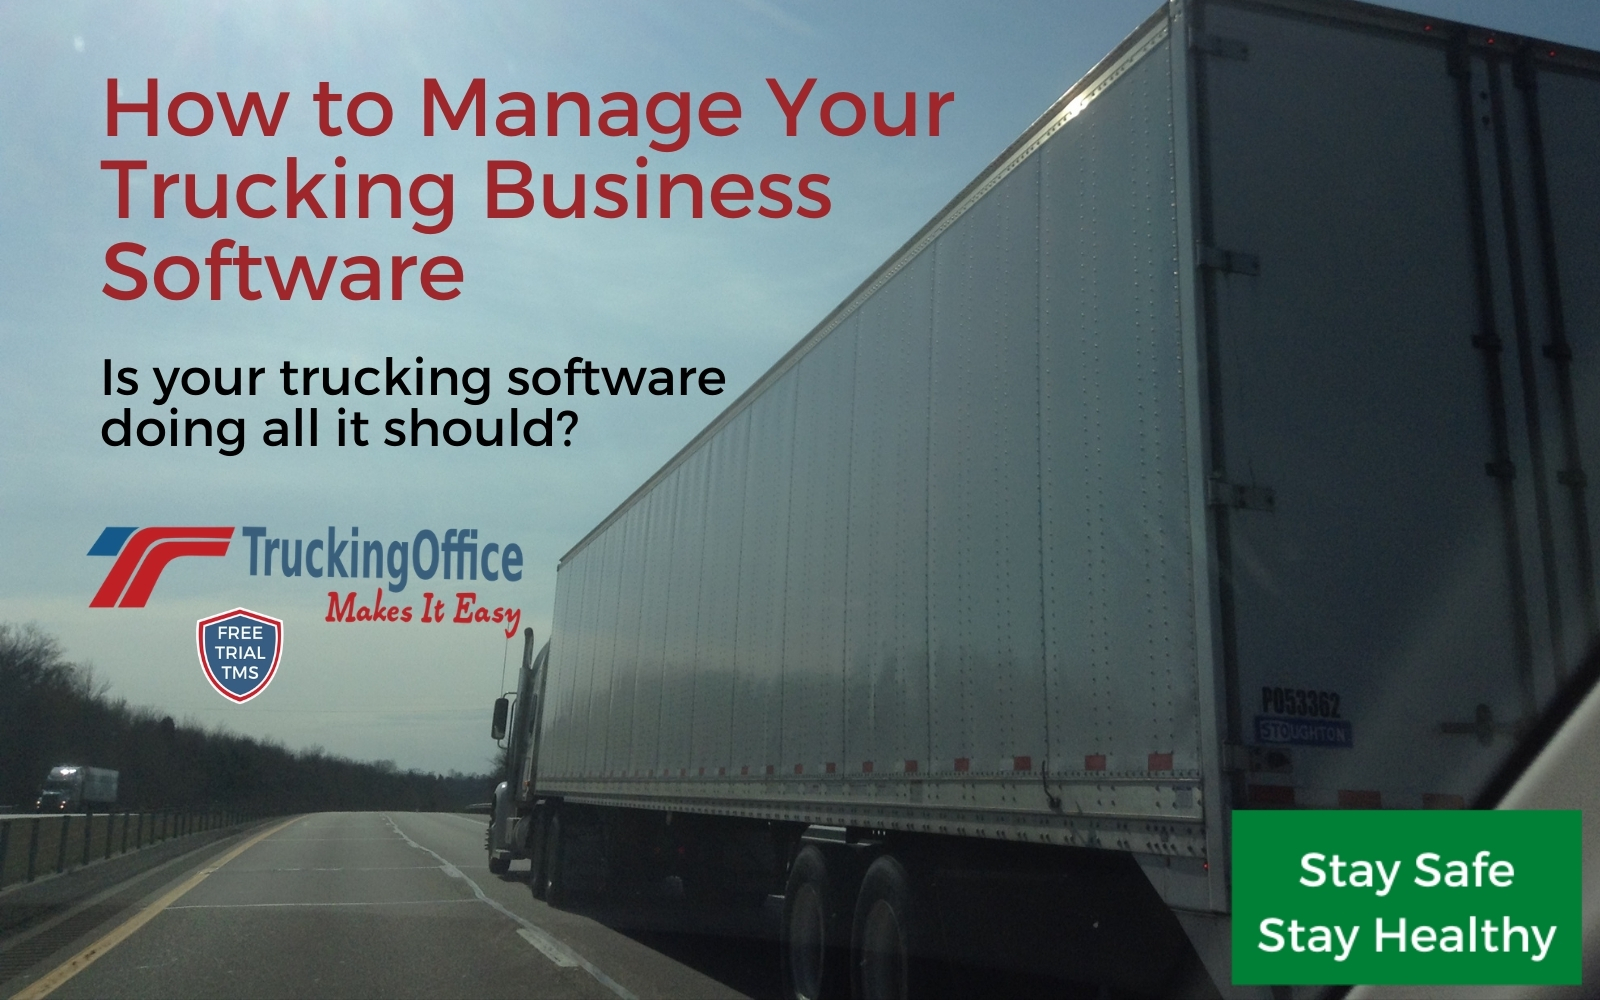 How to Manage Your Trucking Business Software